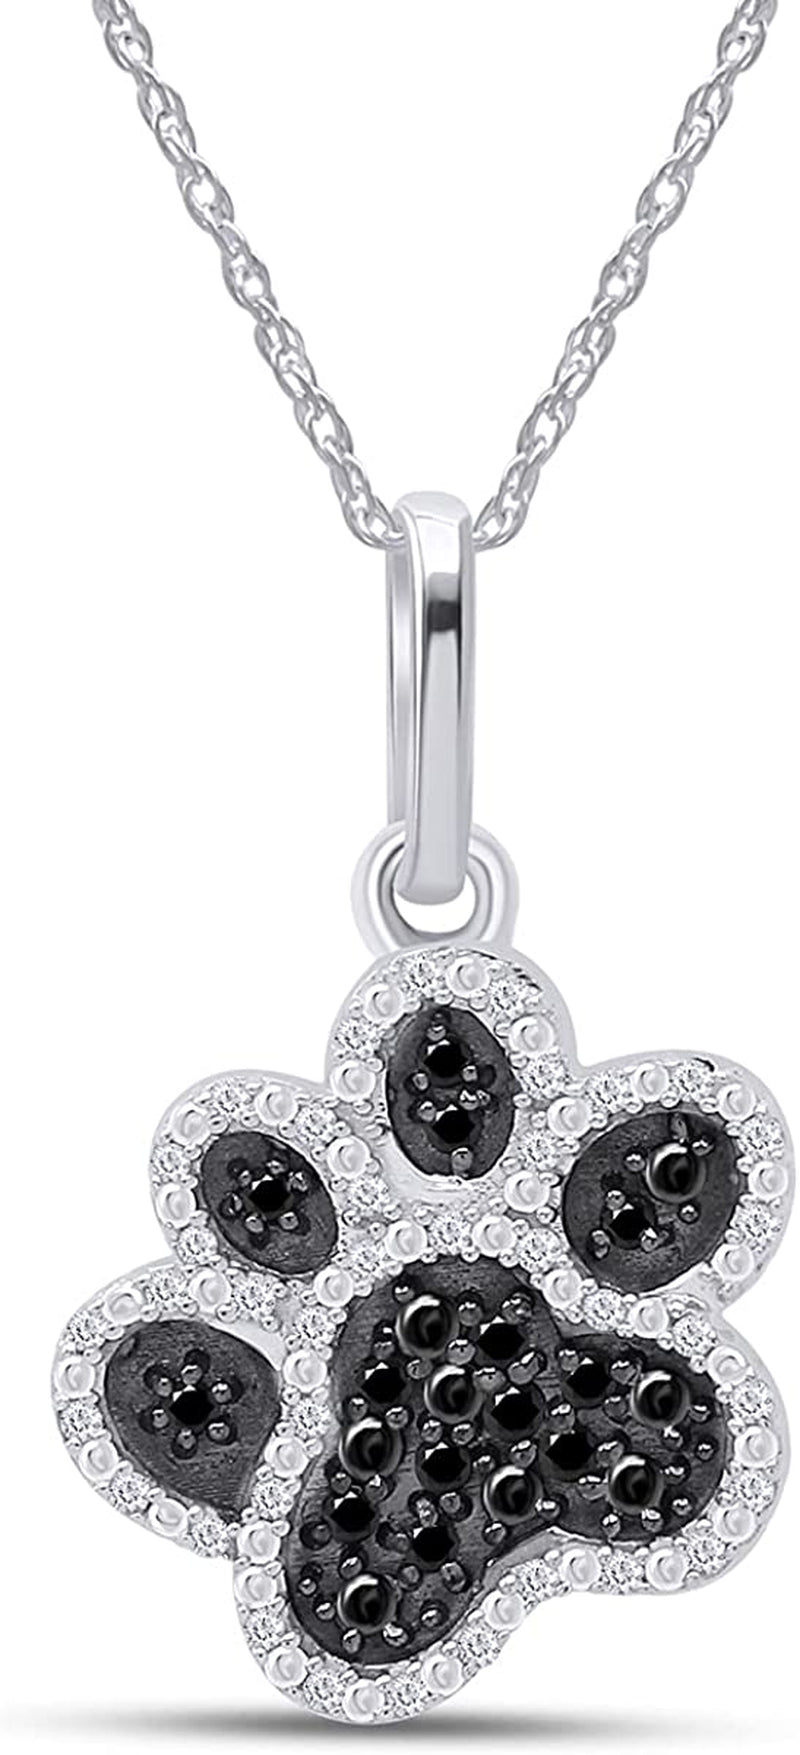 1/5 Carat round Cut Black & White Natural Diamond Dog Paw Pendant Necklace along with 18" Chain in 14K Gold over Sterling Silver (I2-I3 Clarity, 0.20 Cttw)